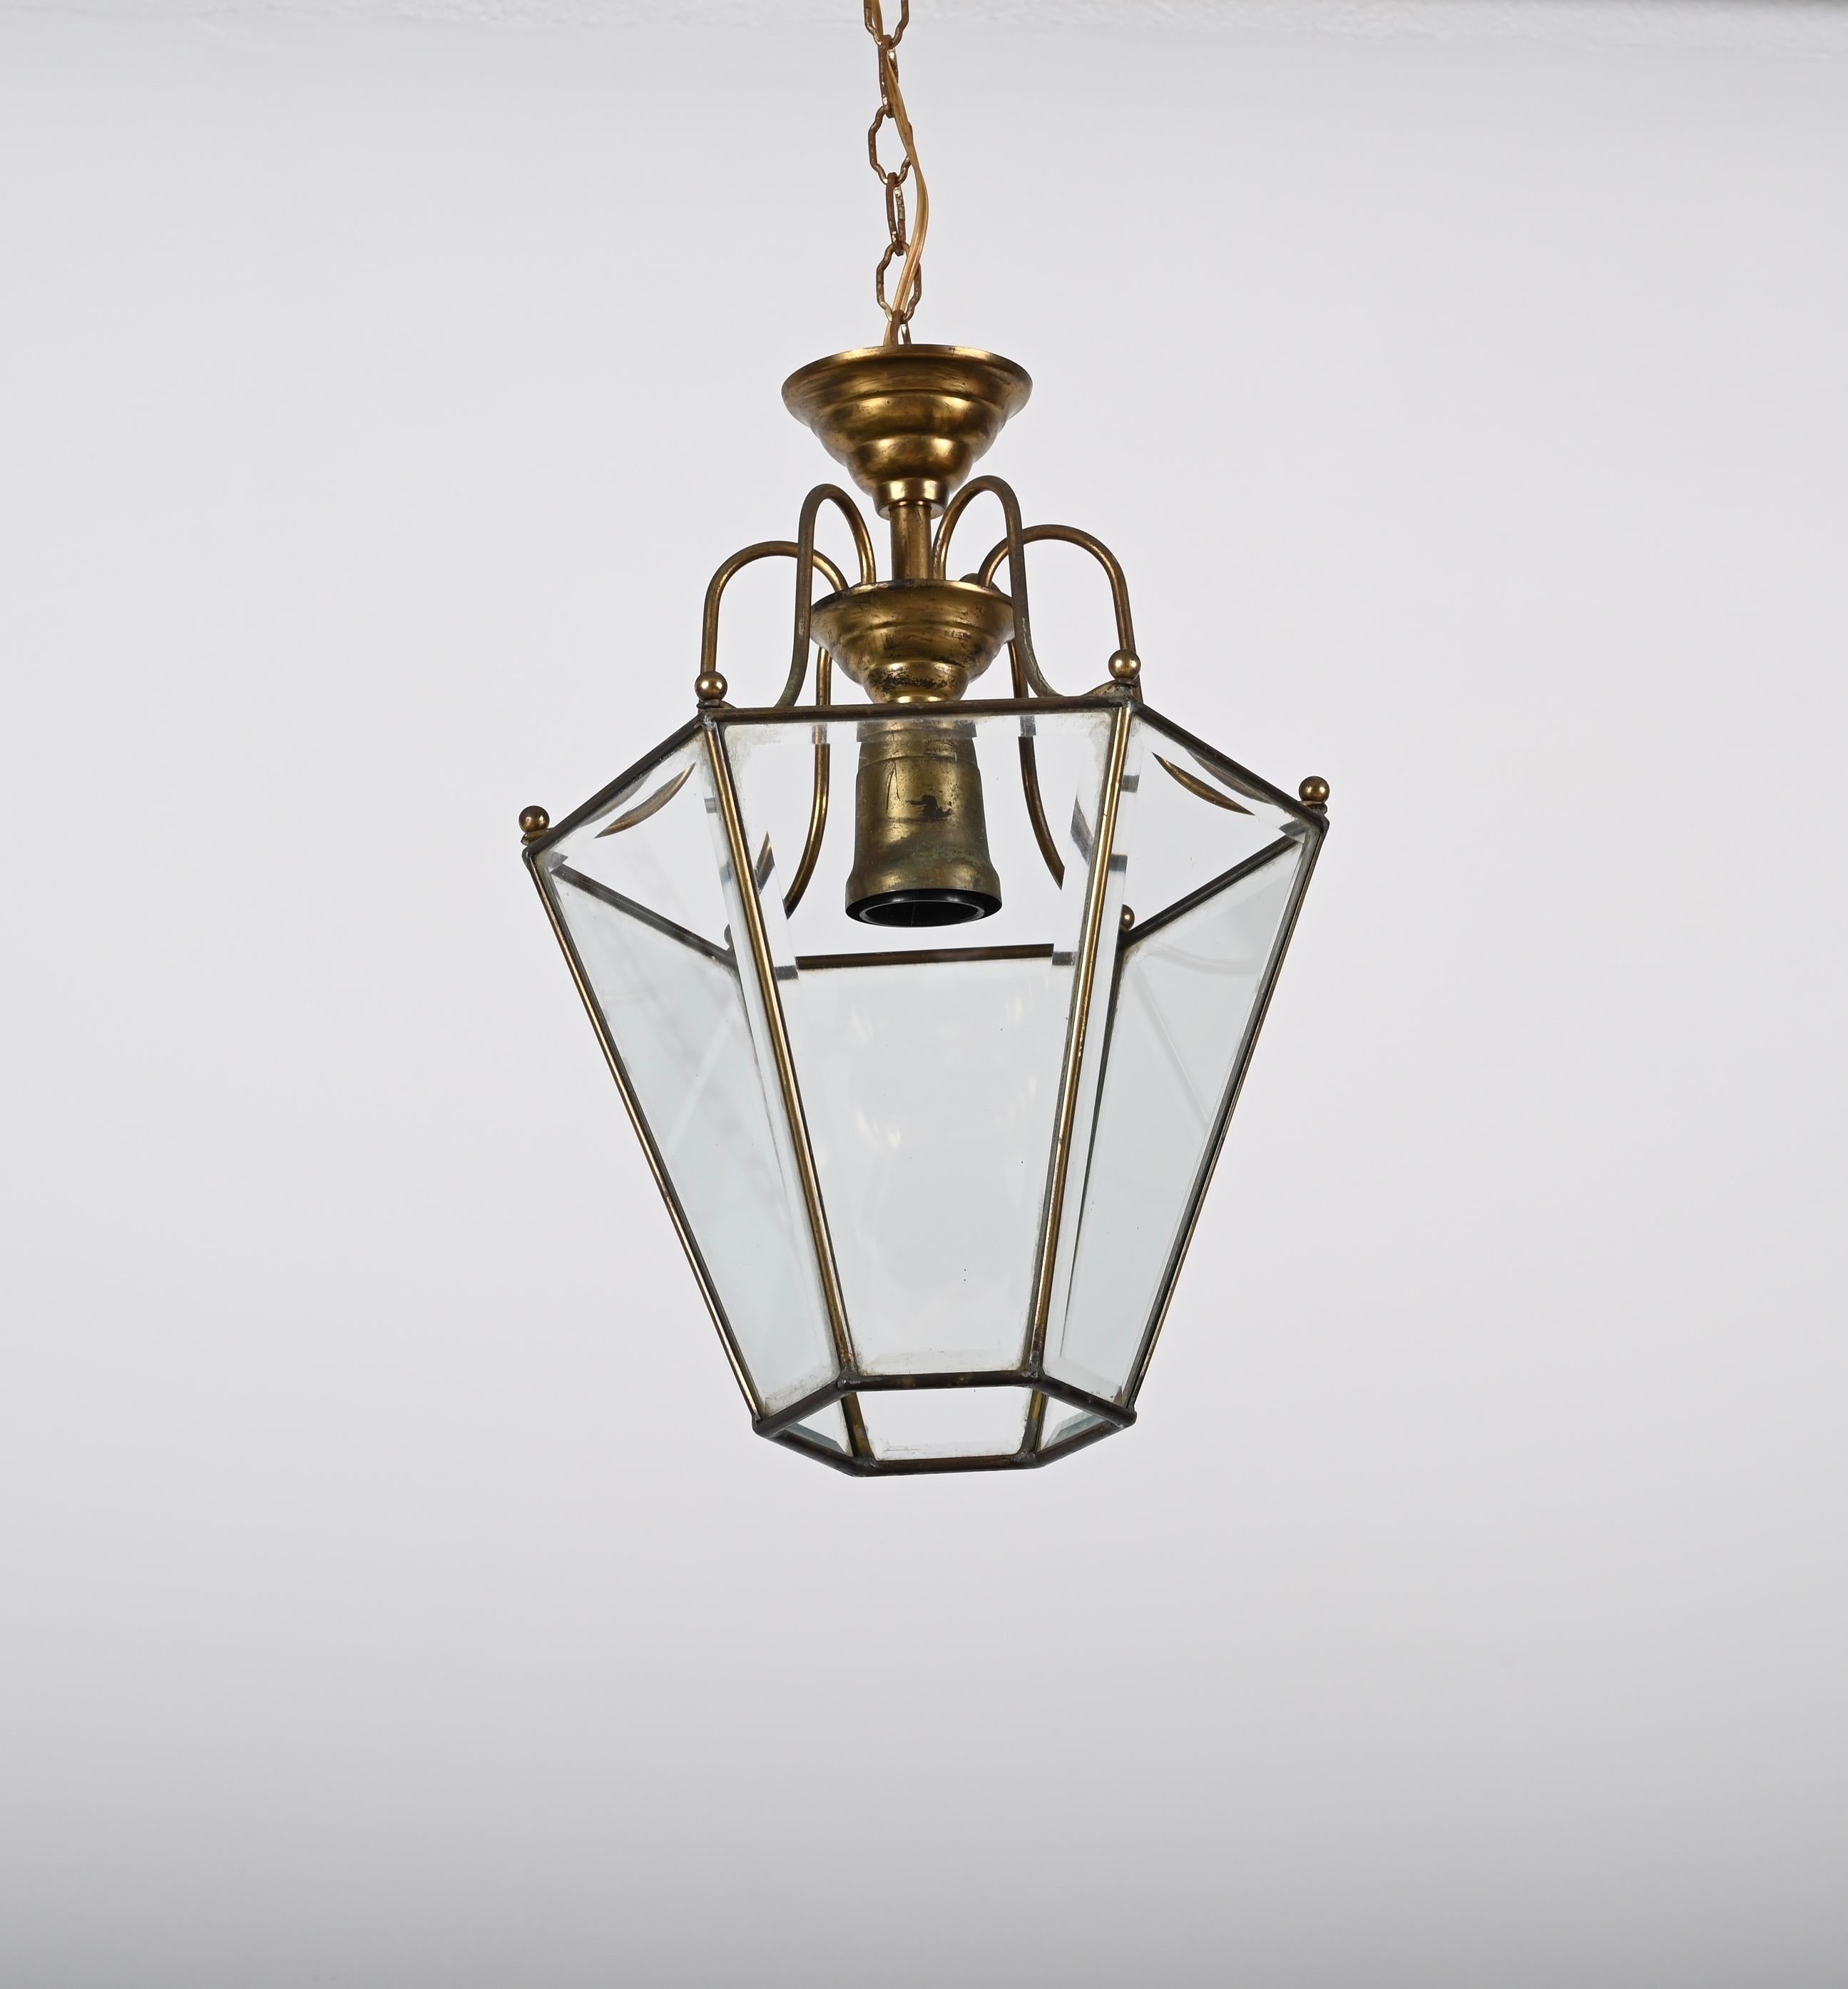 Brass and Beveled Glass Hexagonal Italian Chandelier After Adolf Loos, 1950s For Sale 1